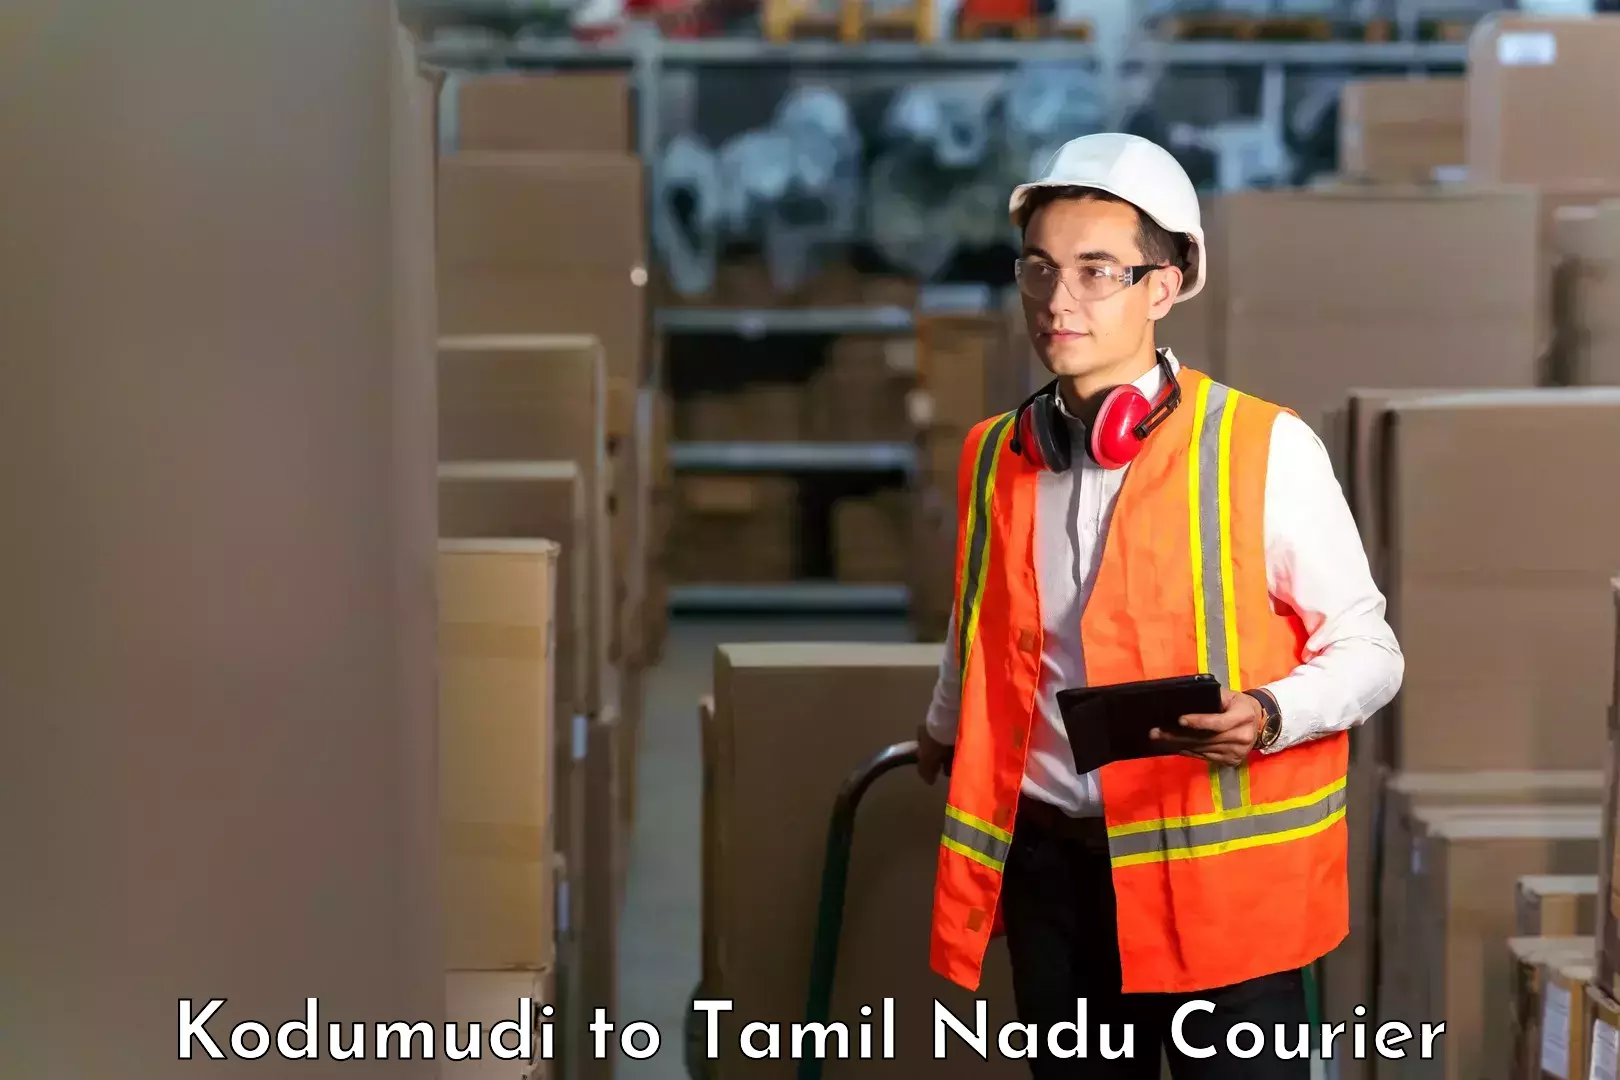 Nationwide courier service Kodumudi to Meenakshi Academy of Higher Education and Research Chennai